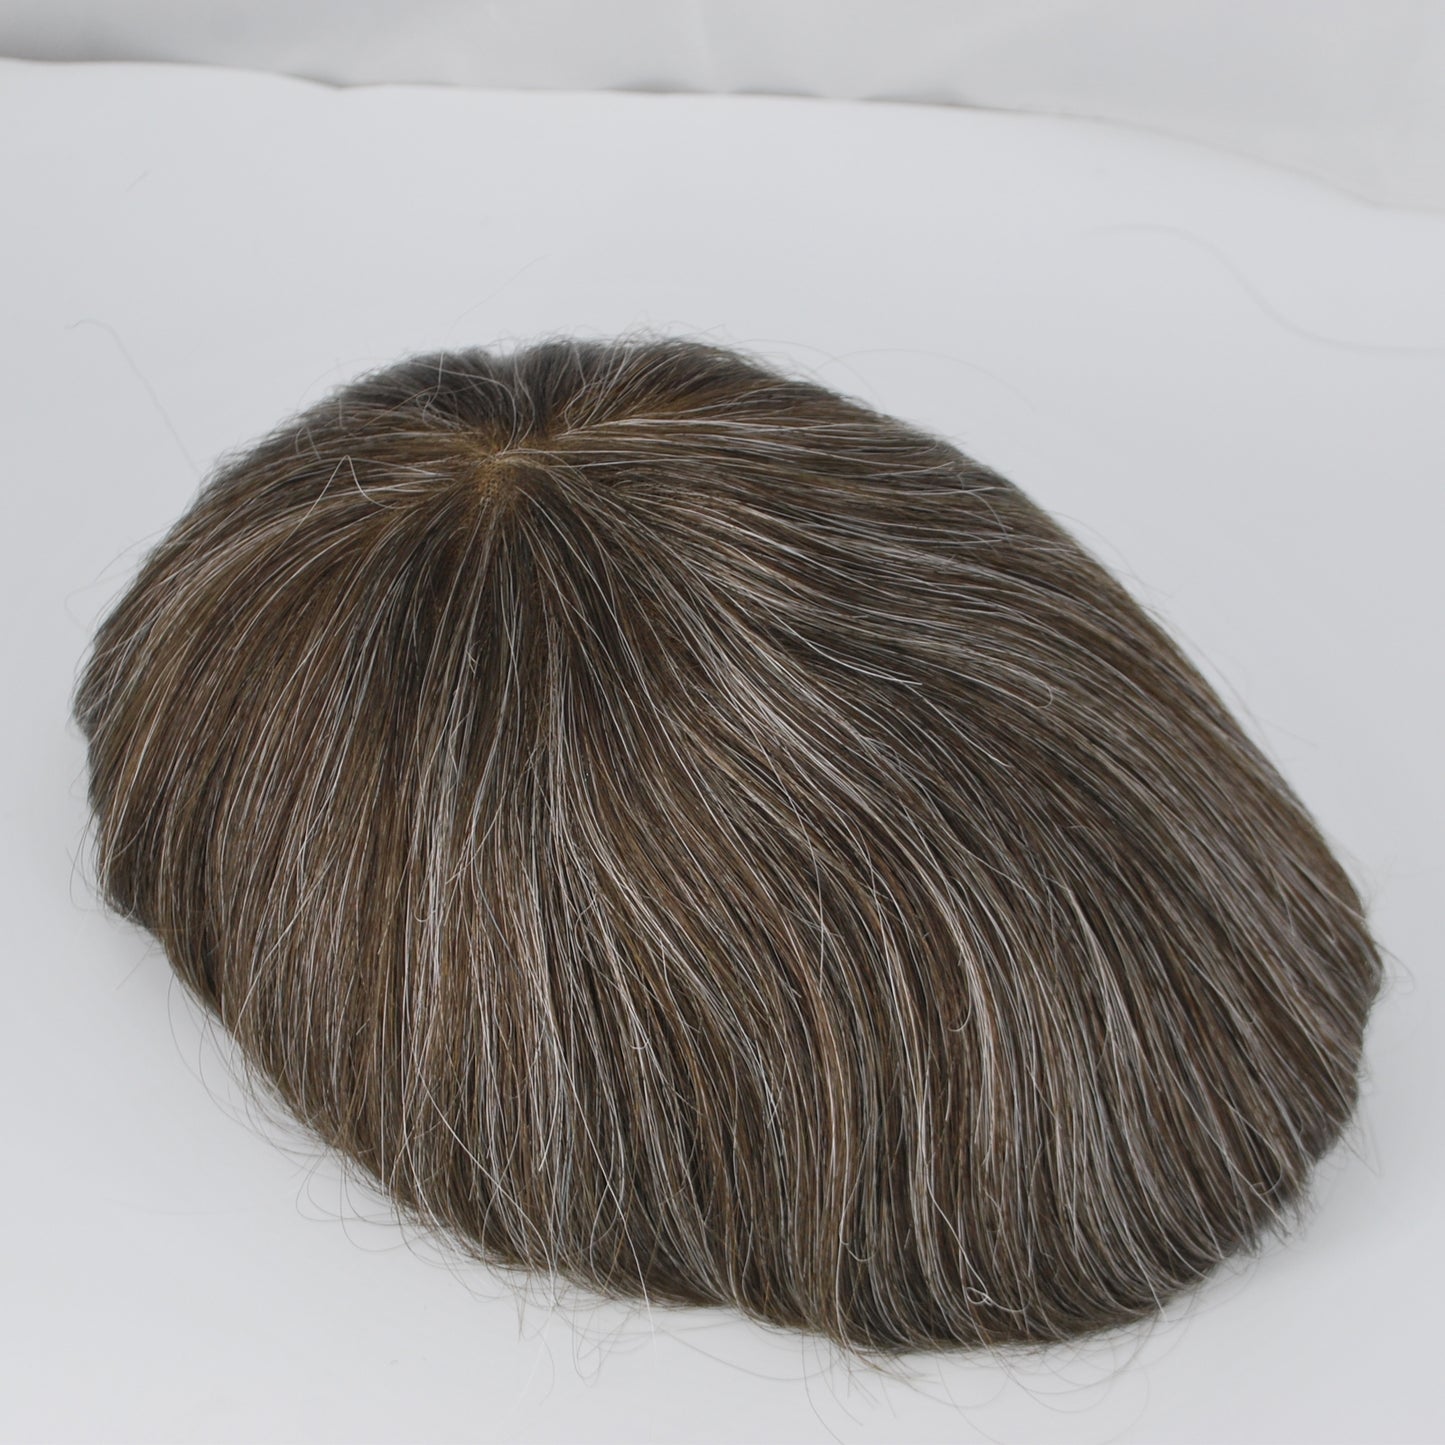 Clearance grey mixed men's toupee #2 25%  full french lace 11x9 hair system replacement